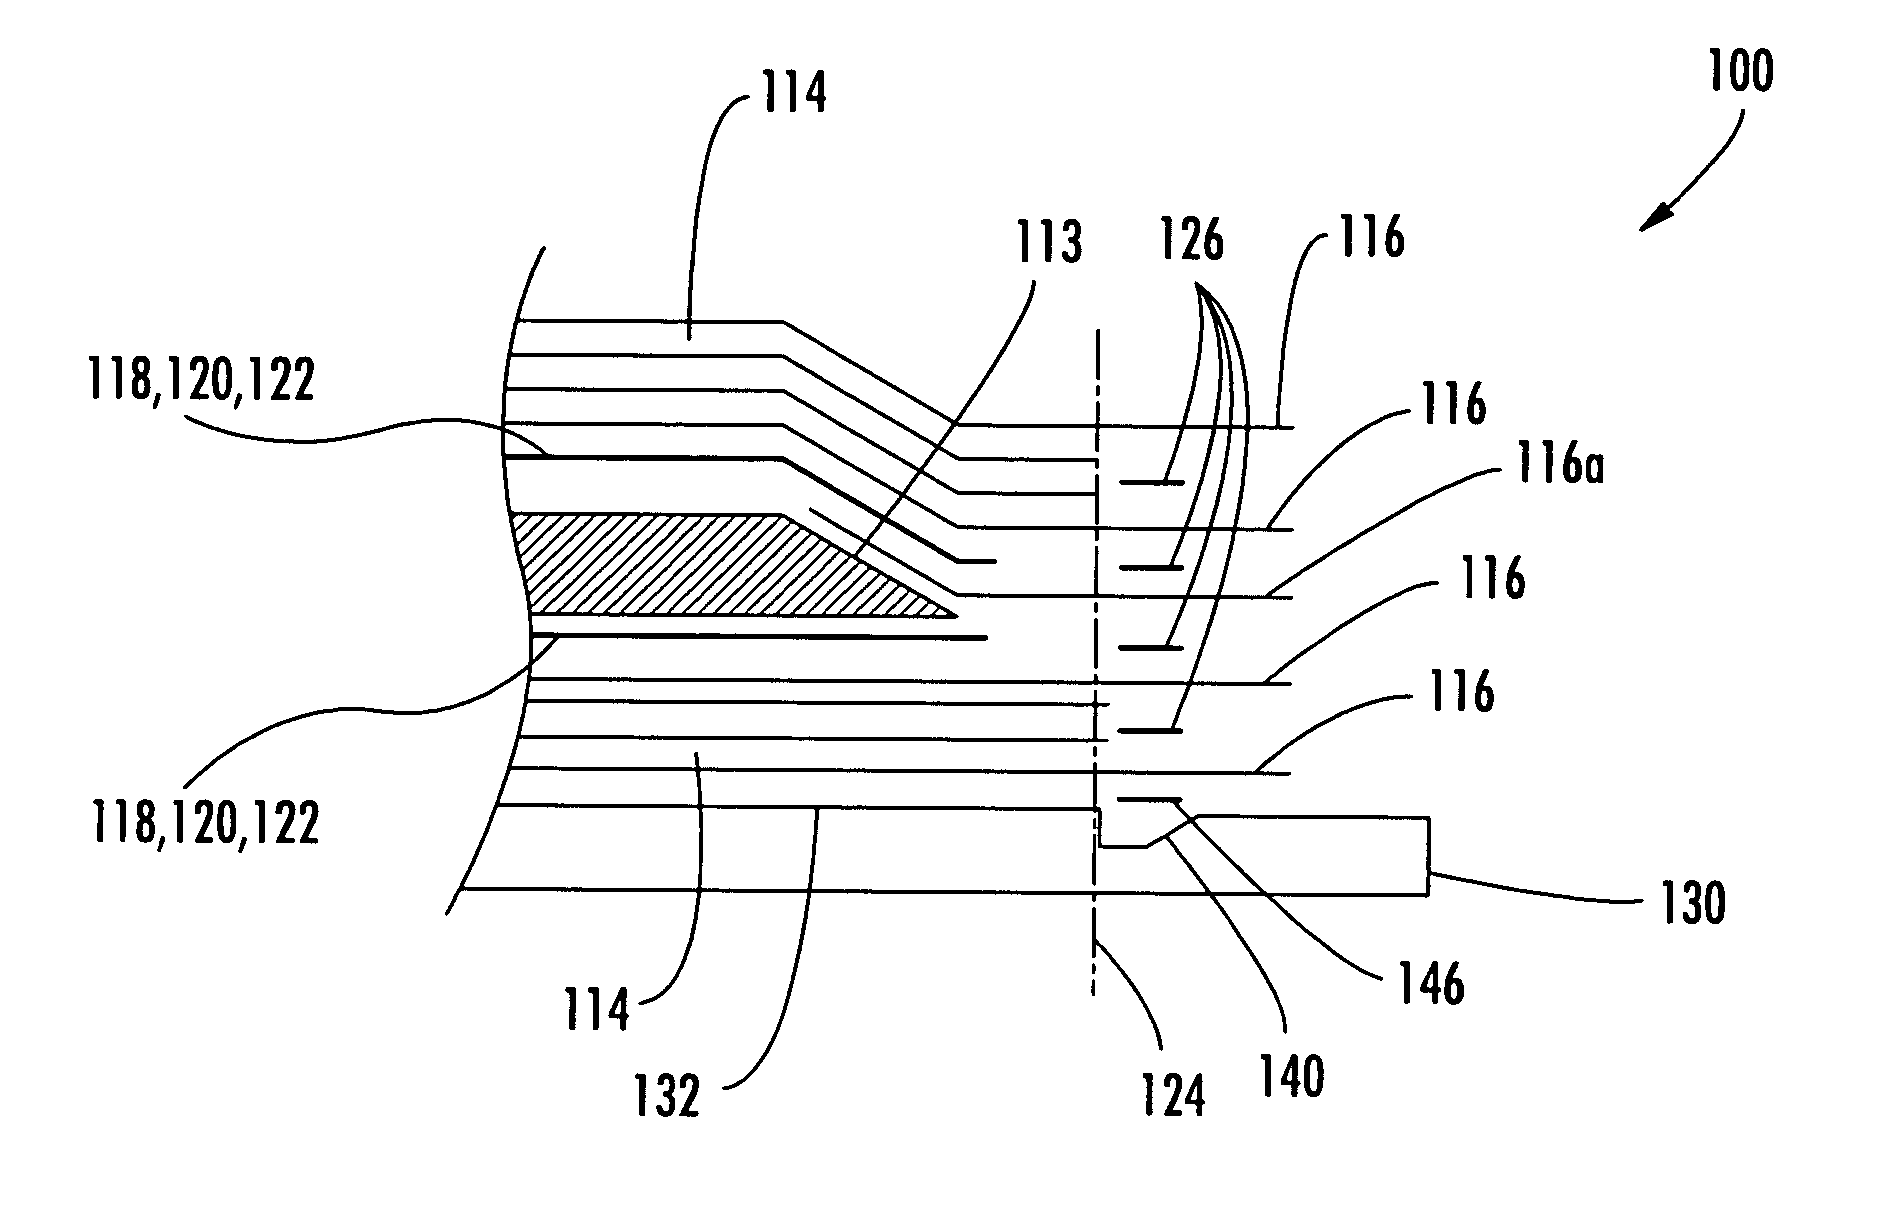 Mandrel and method for manufacturing composite structures